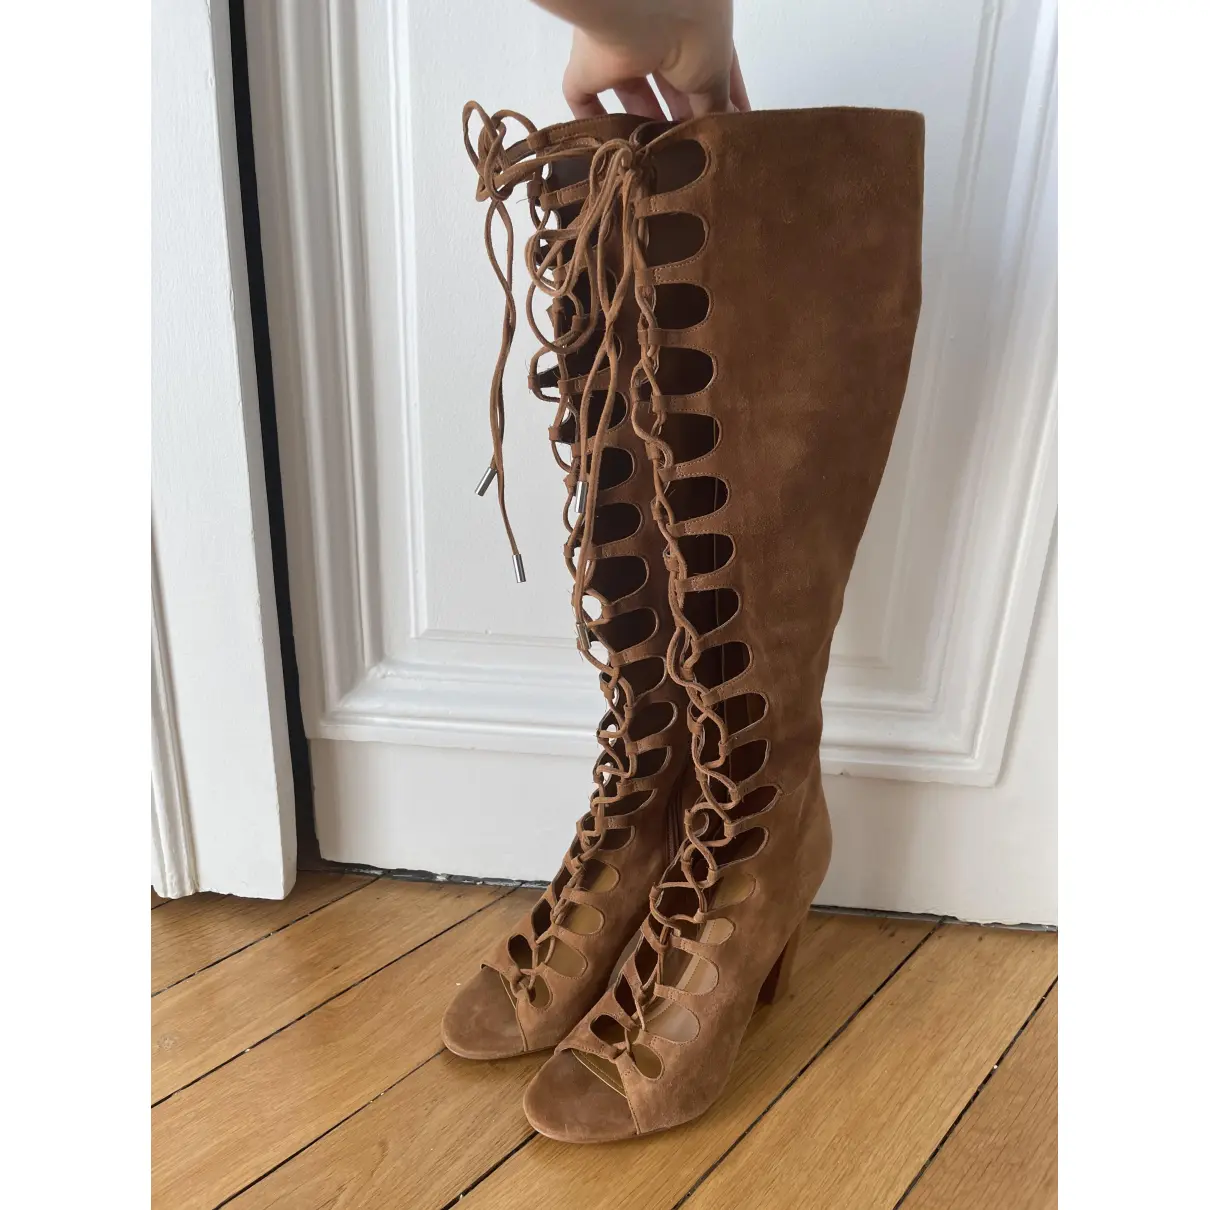 Luxury Kendall + Kylie Boots Women